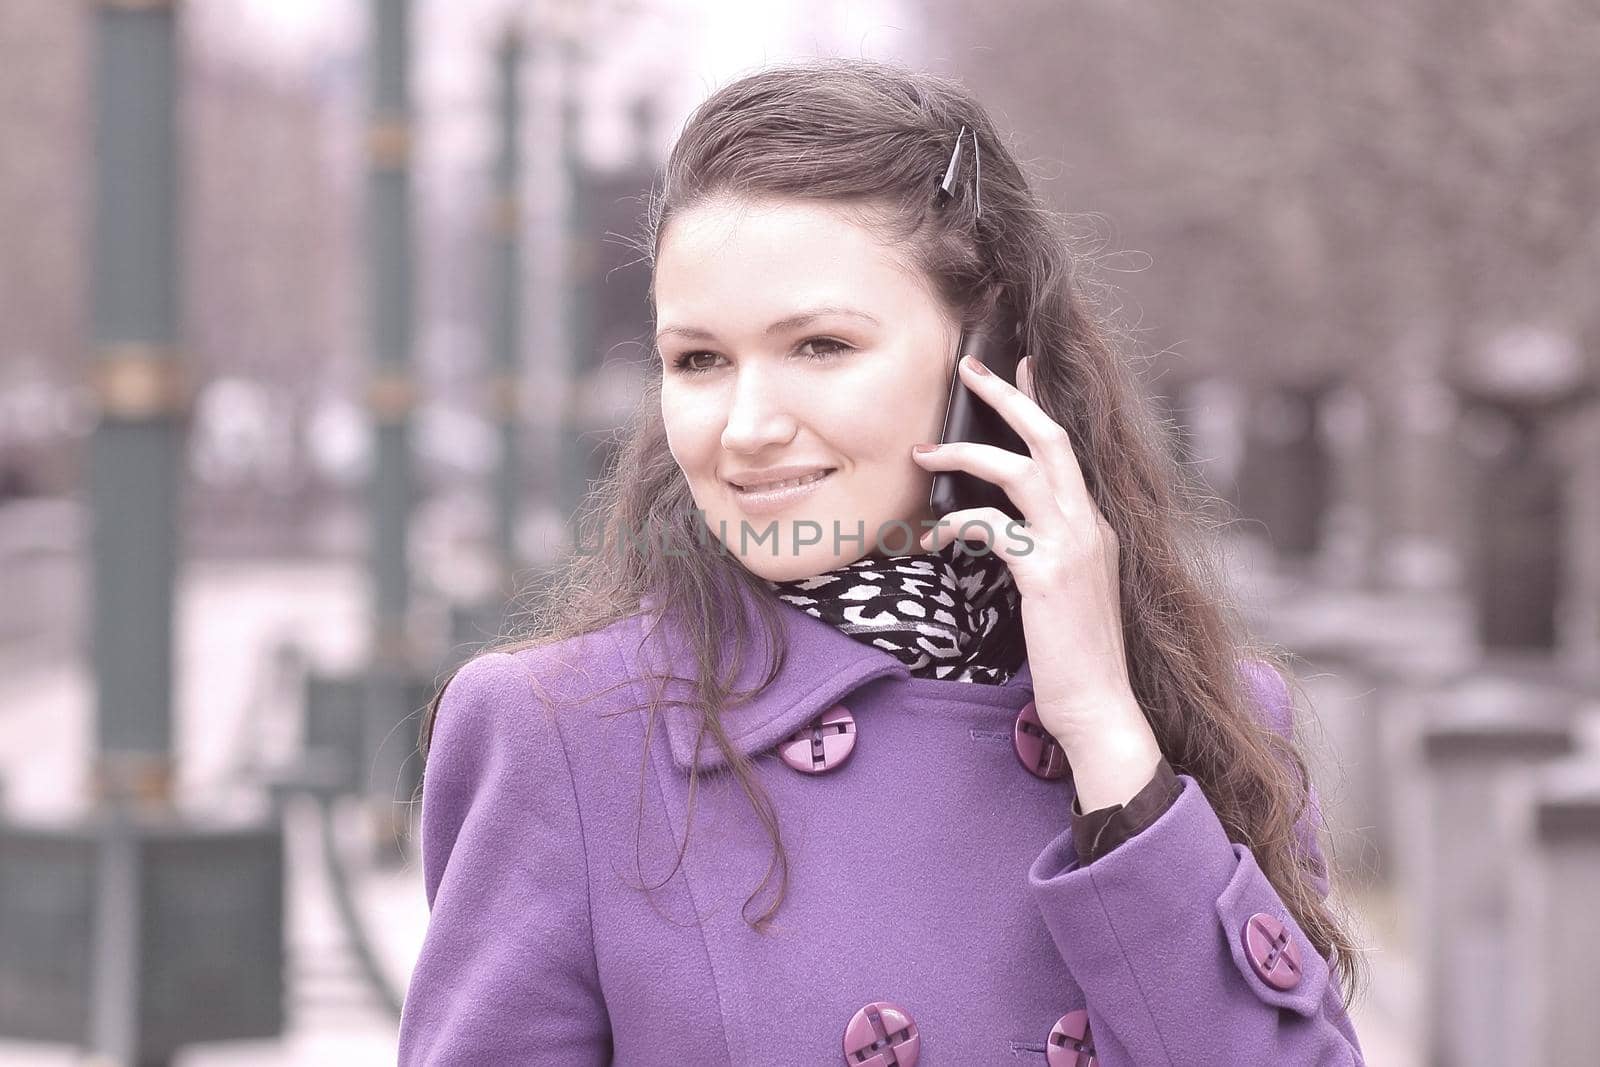 young woman talking on smartphone in city street.